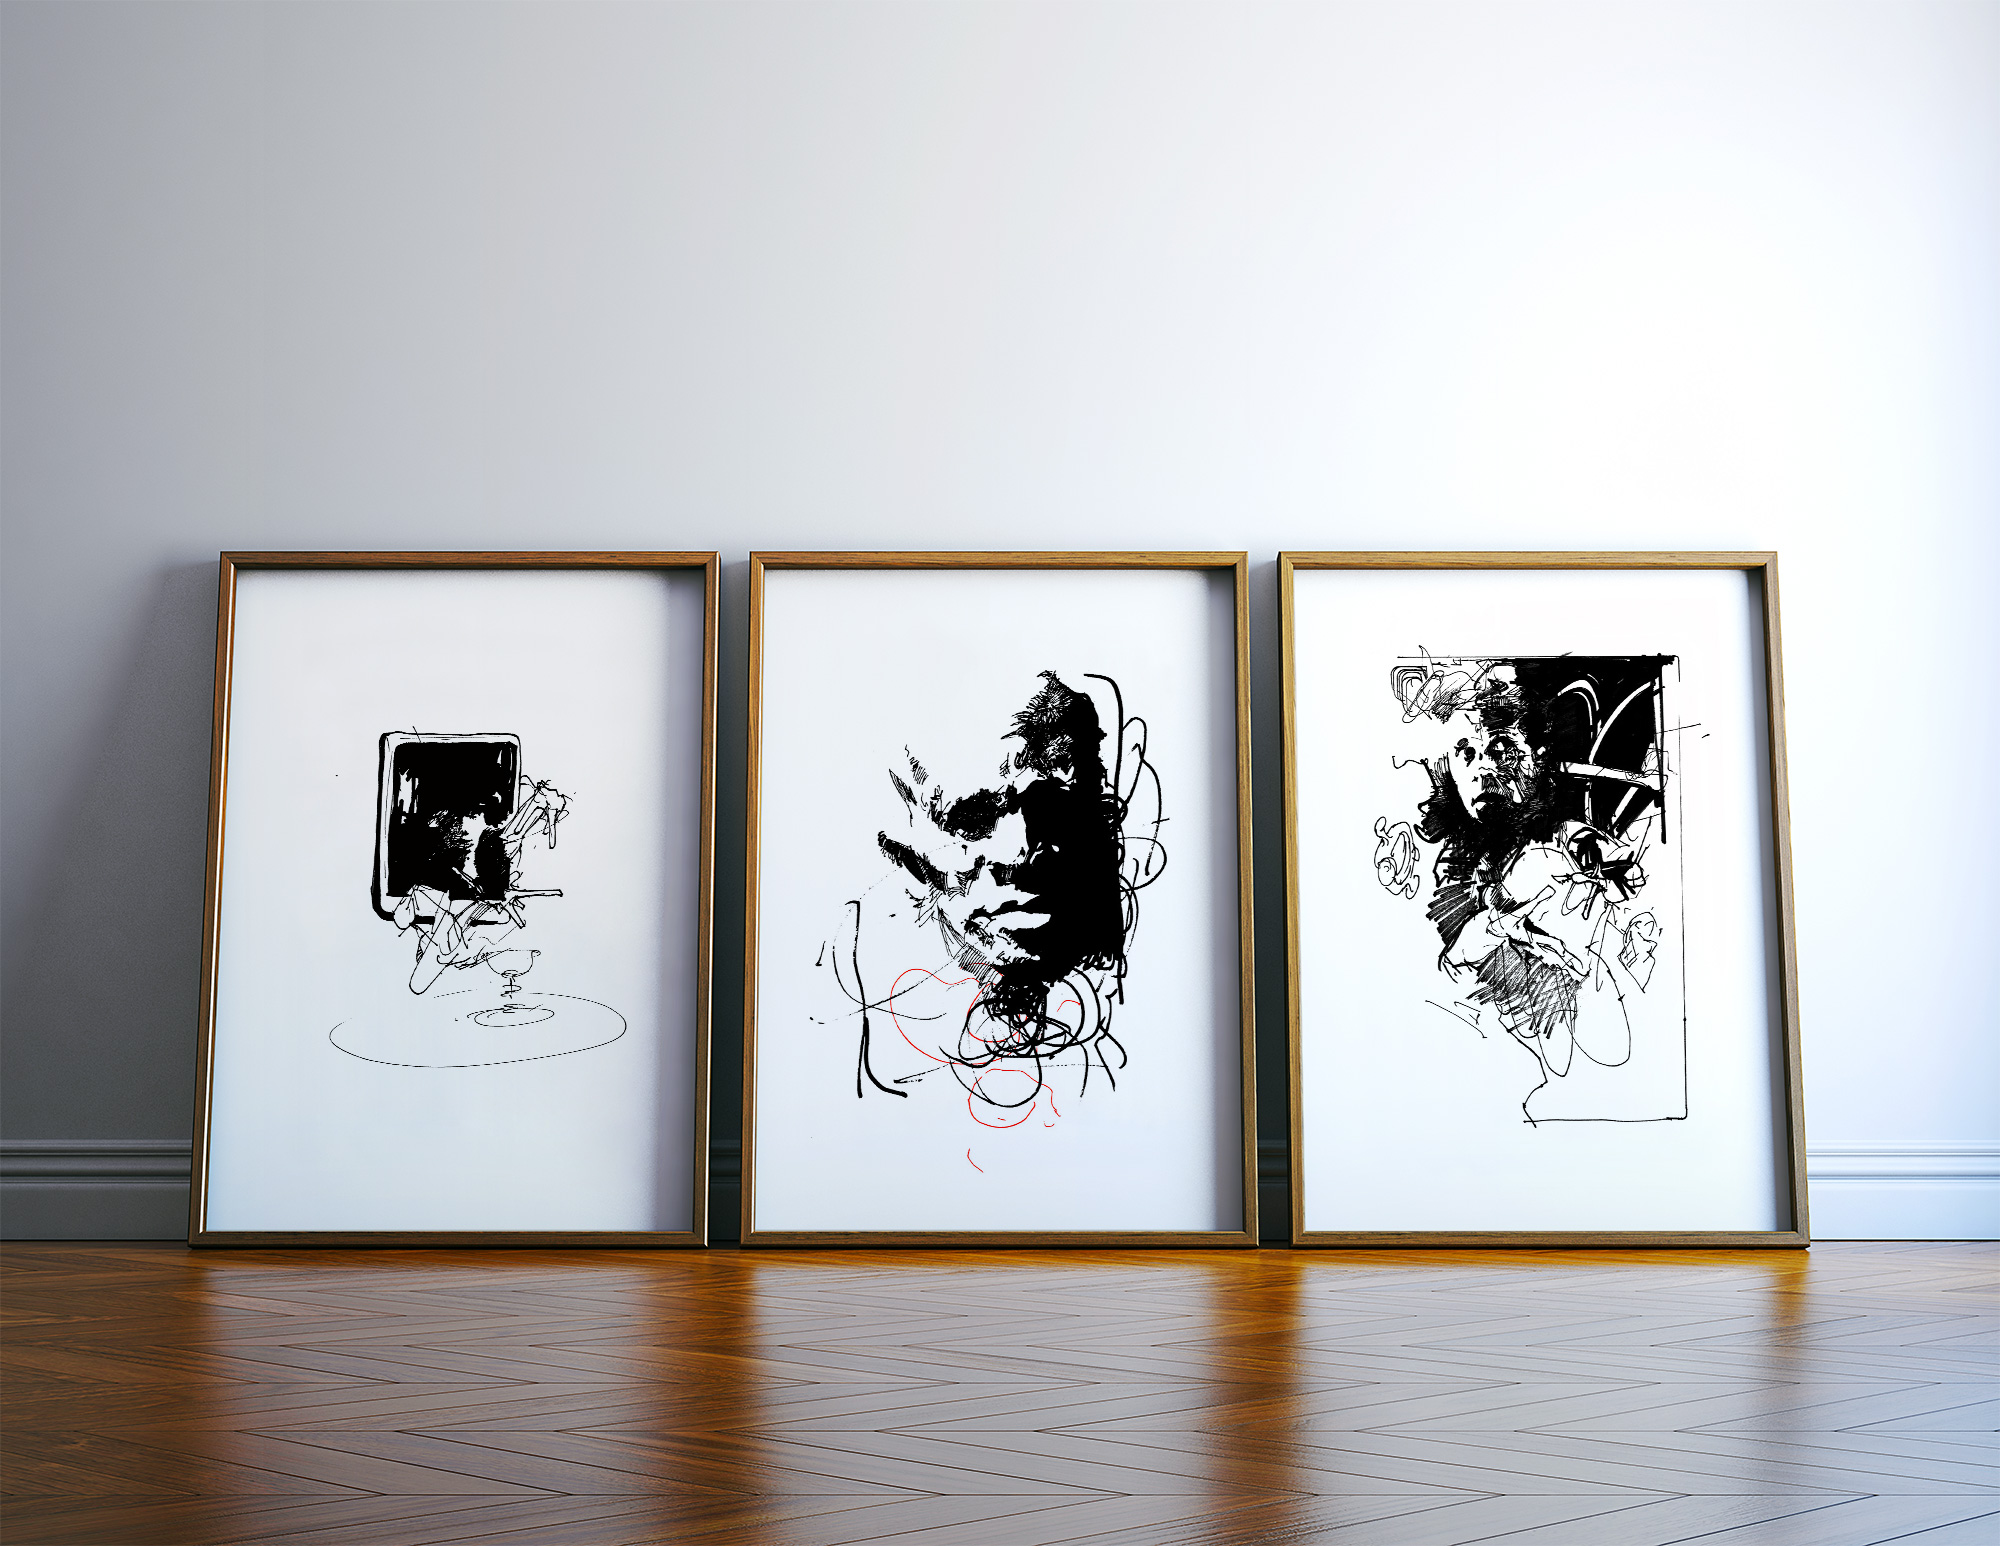 posters-prints, giclee-print, expressive, monochrome, patterns, people, black, white, ink, paper, black-and-white, contemporary-art, danish, design, expressionism, faces, interior, interior-design, modern, modern-art, nordic, posters, prints, scandinavien, Buy original high quality art. Paintings, drawings, limited edition prints & posters by talented artists.